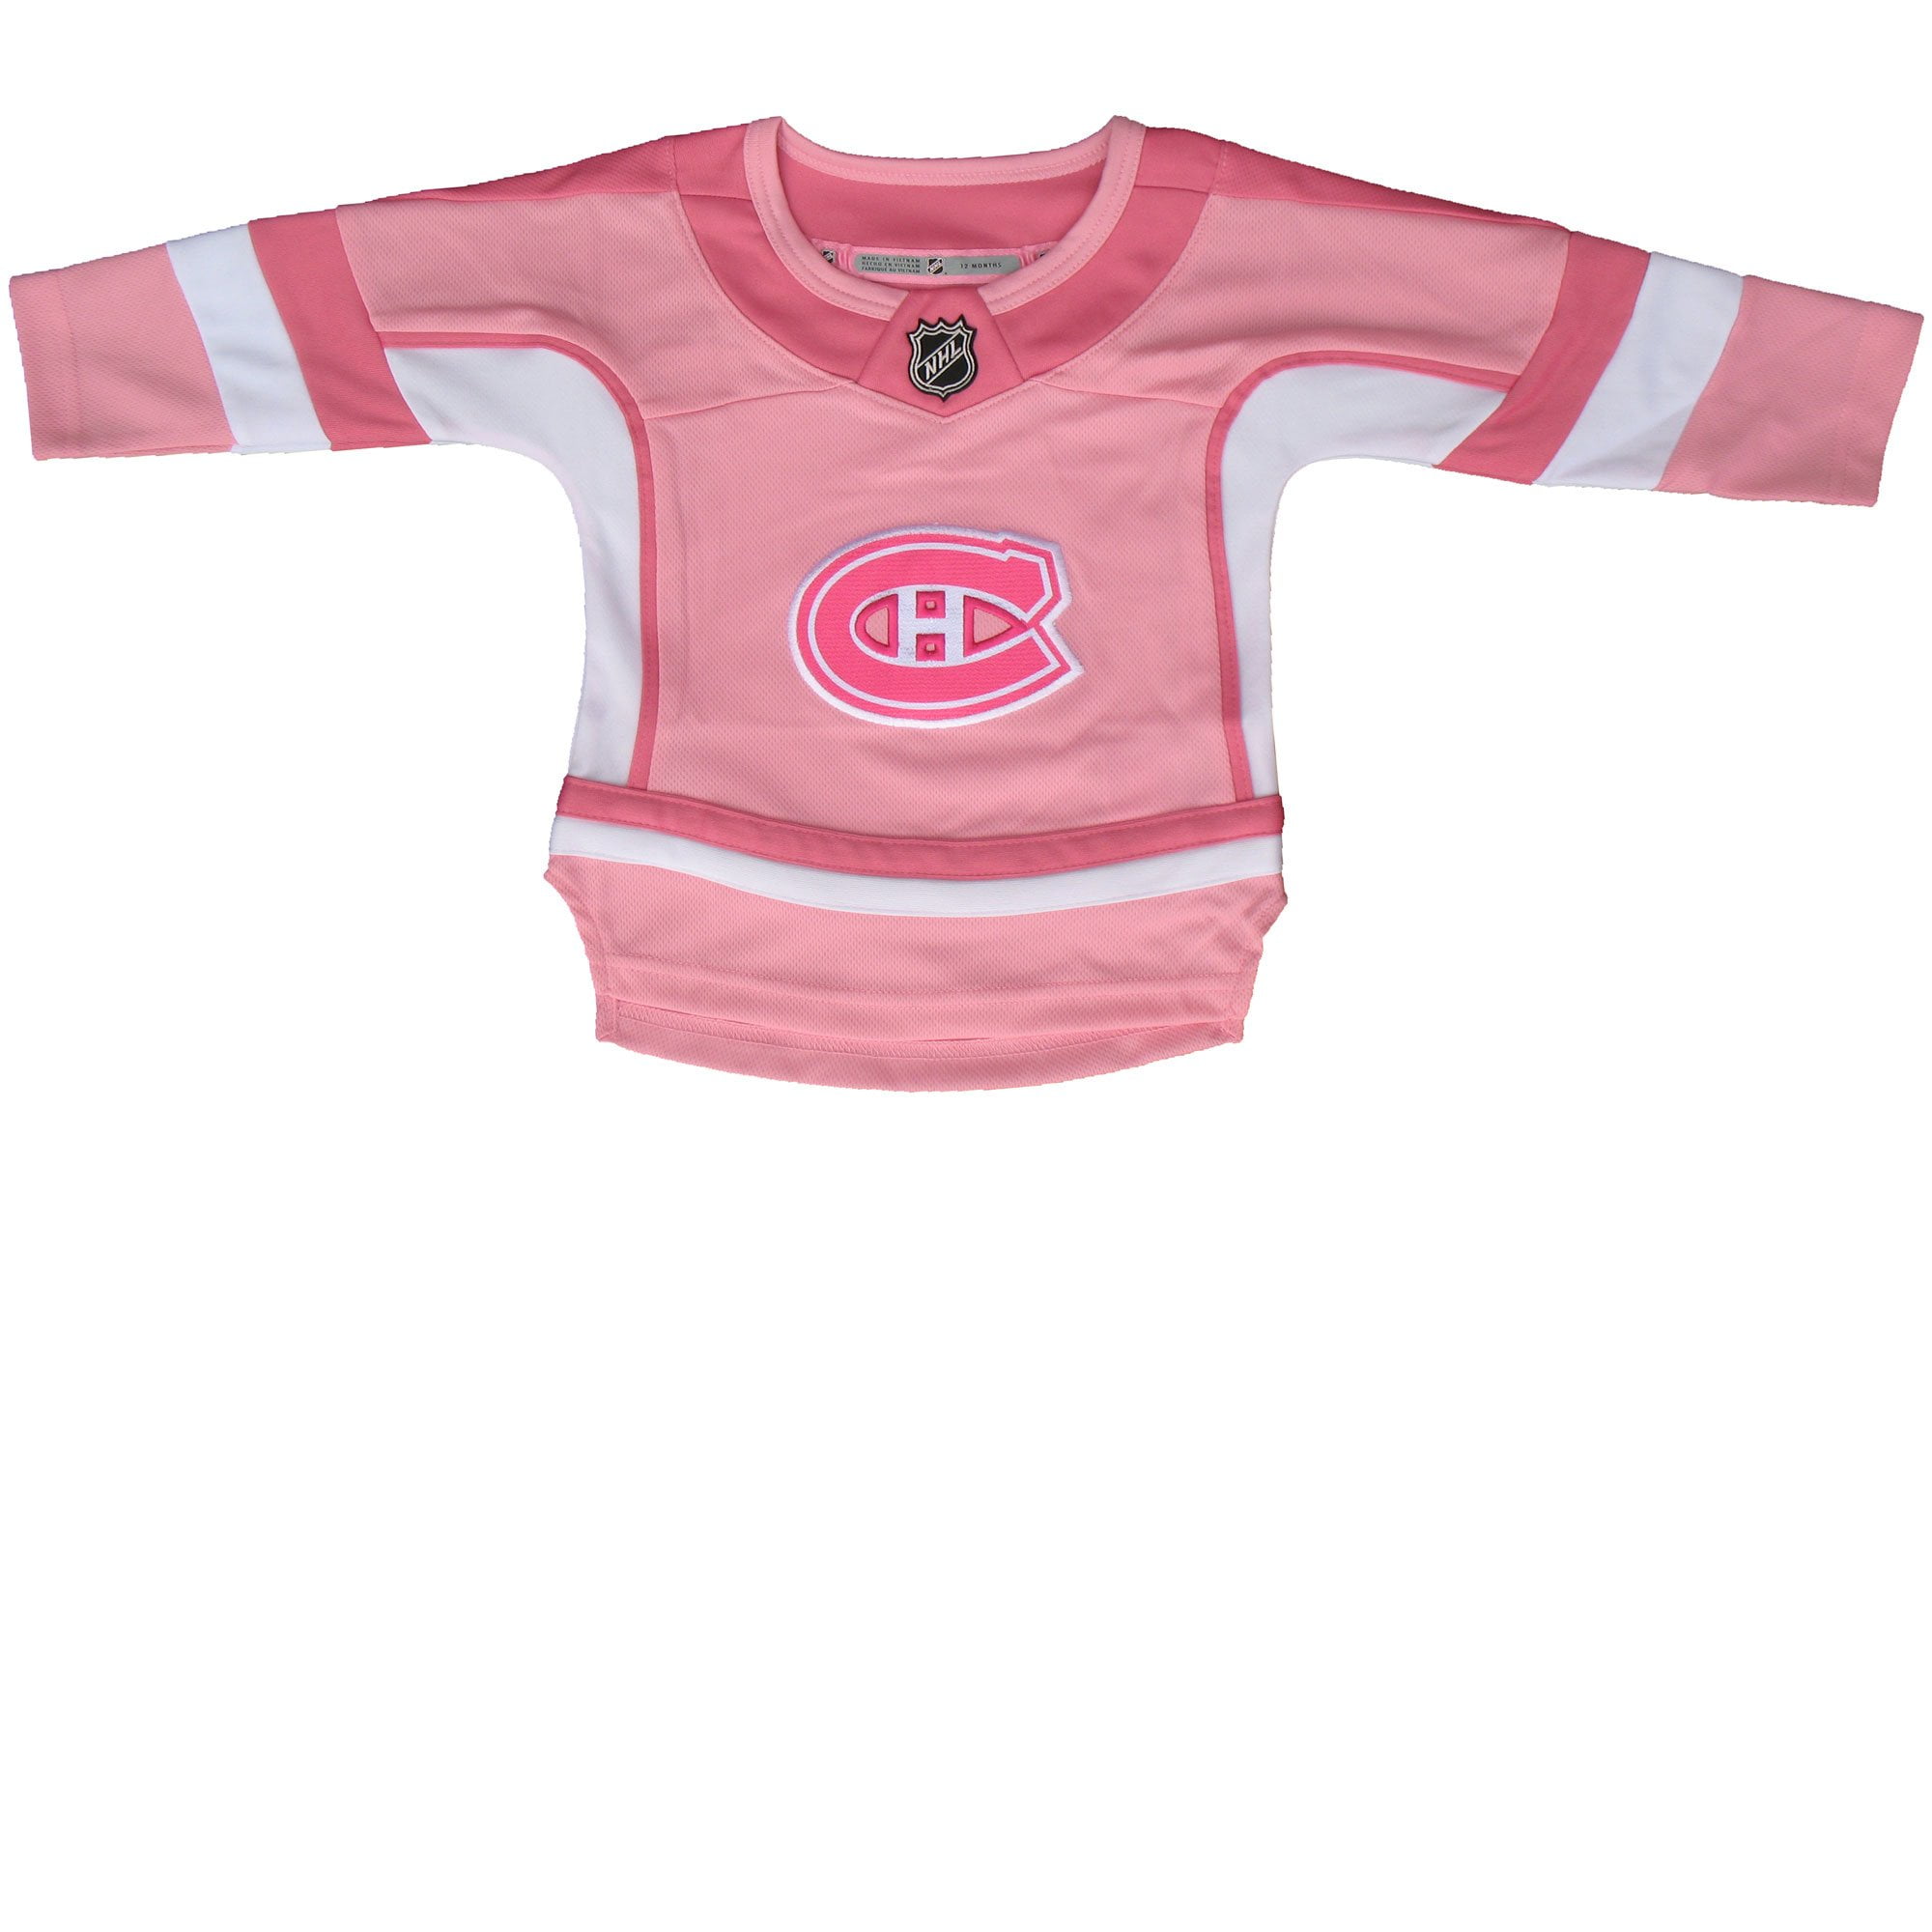 montreal canadiens baby jersey